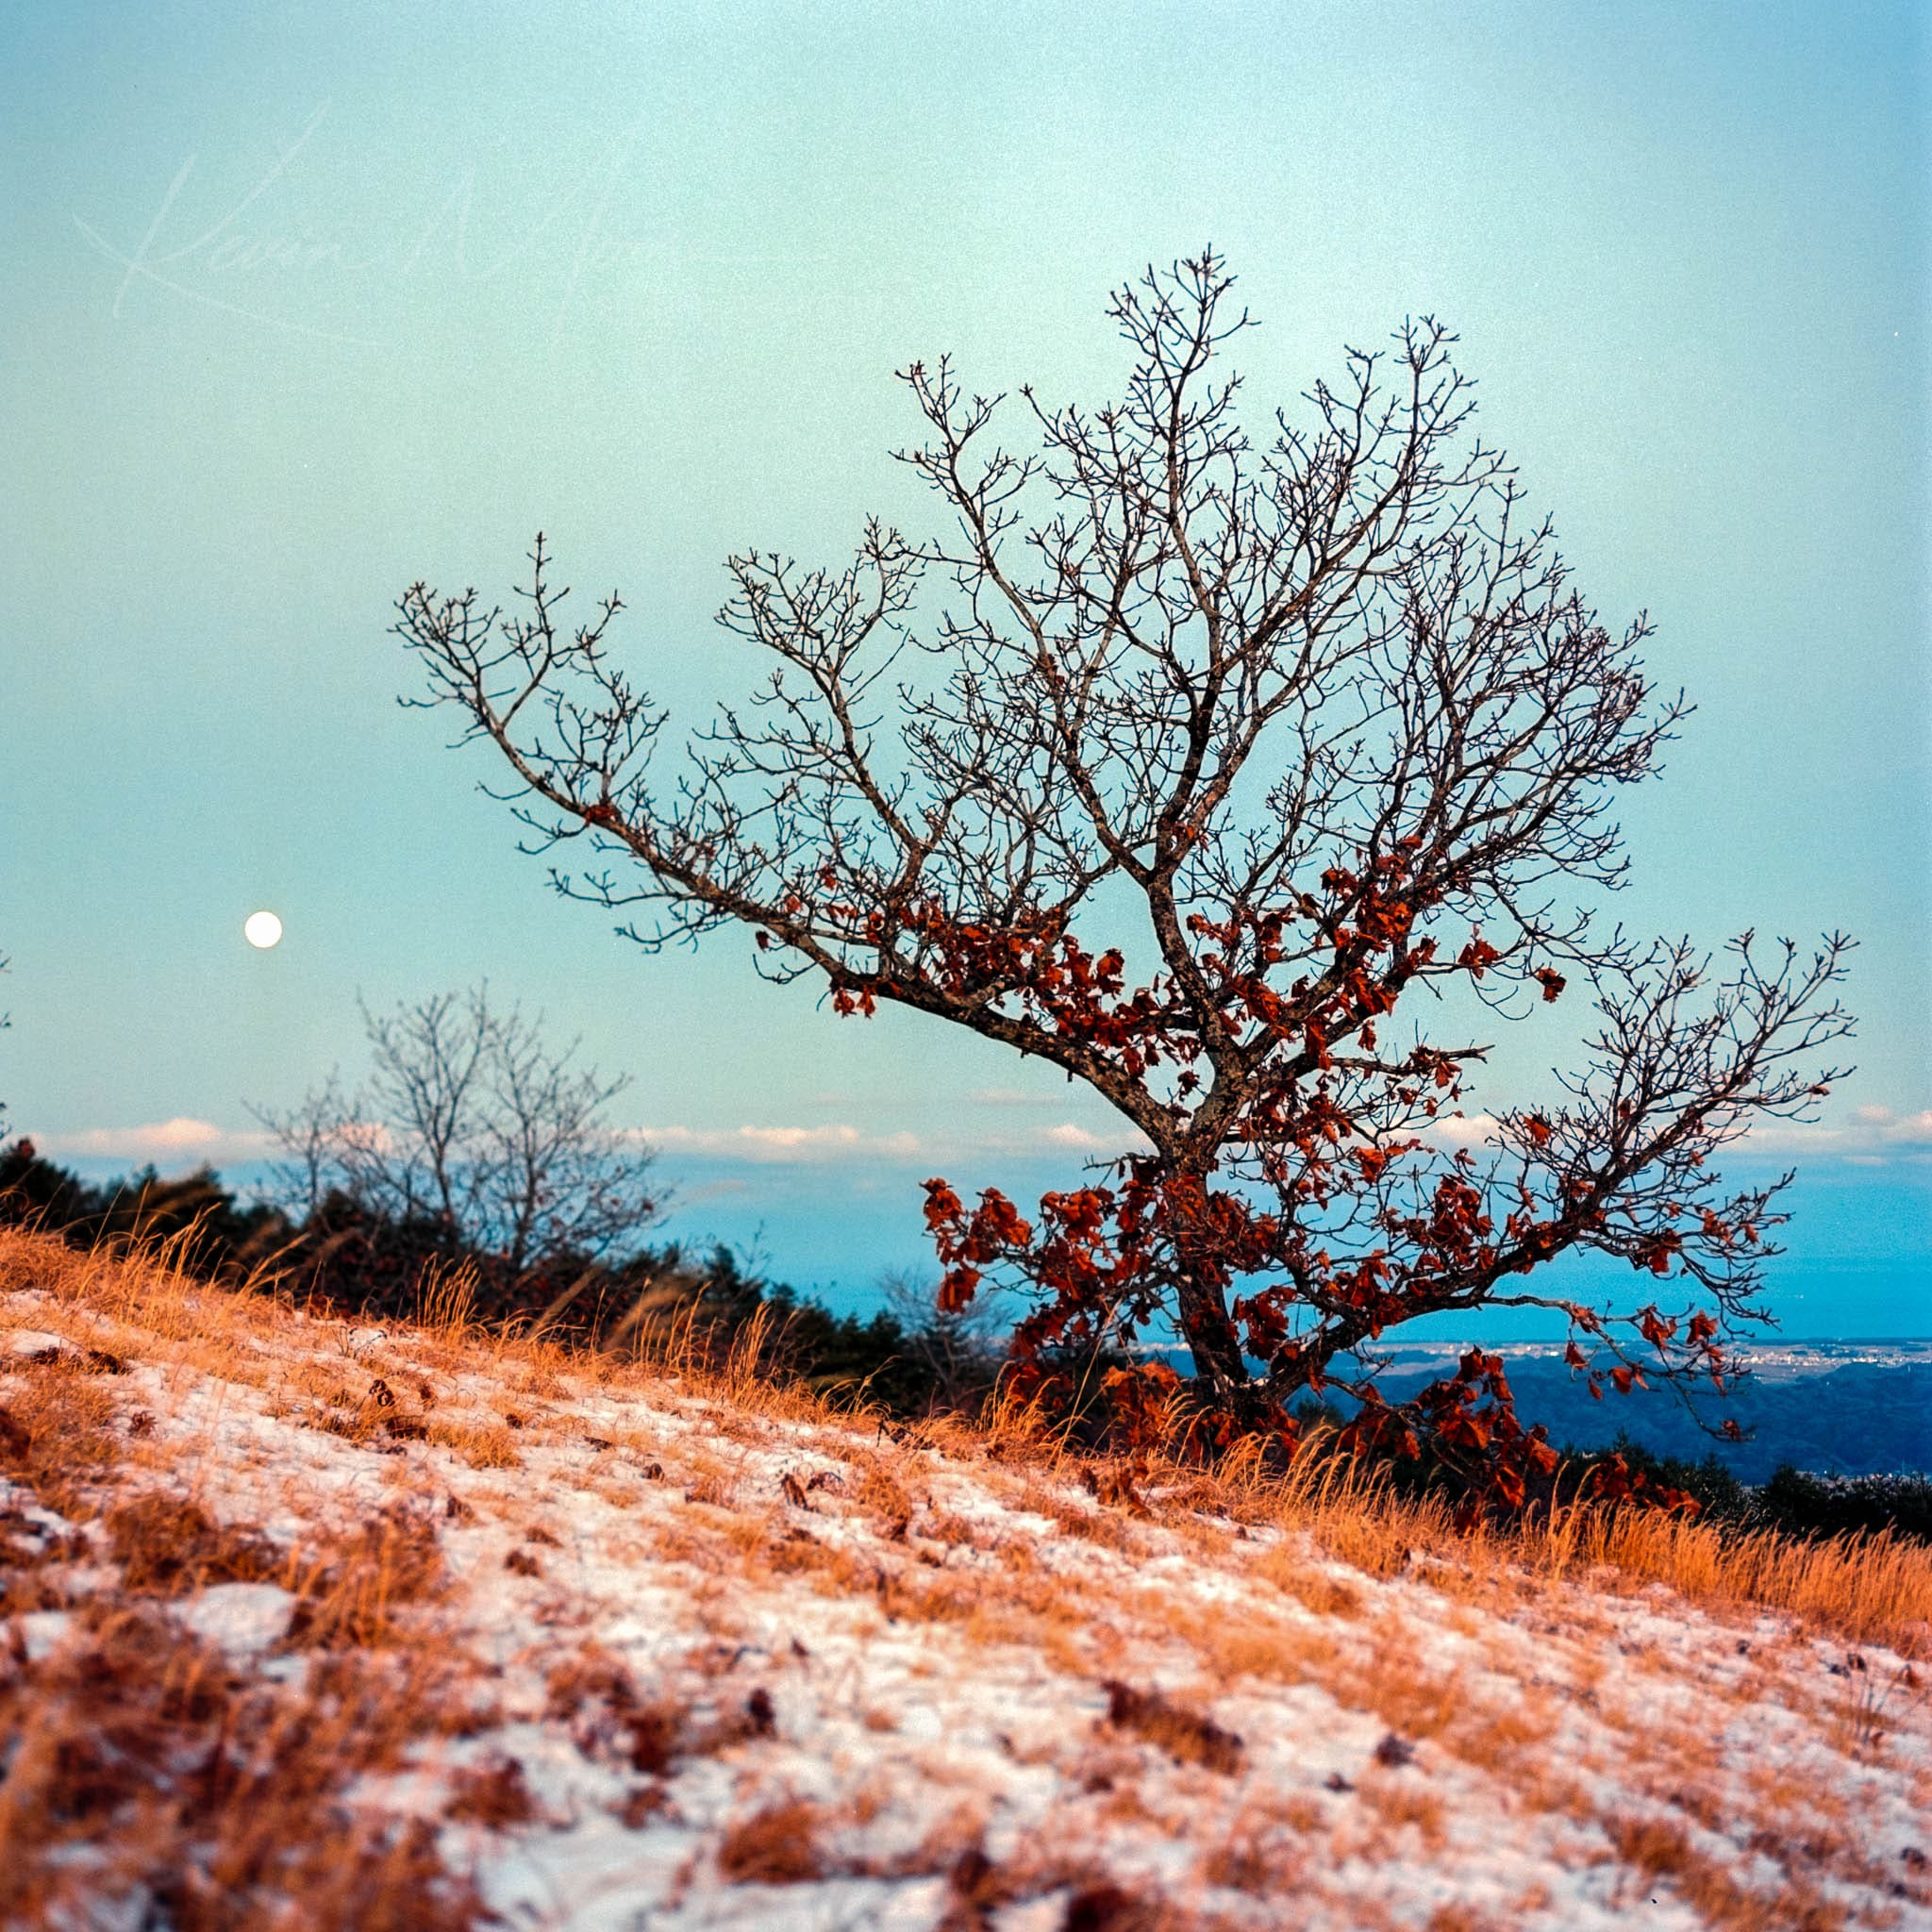 Leafless tree in serene winter-autumn landscape with dusted snow and gradient sunset sky.